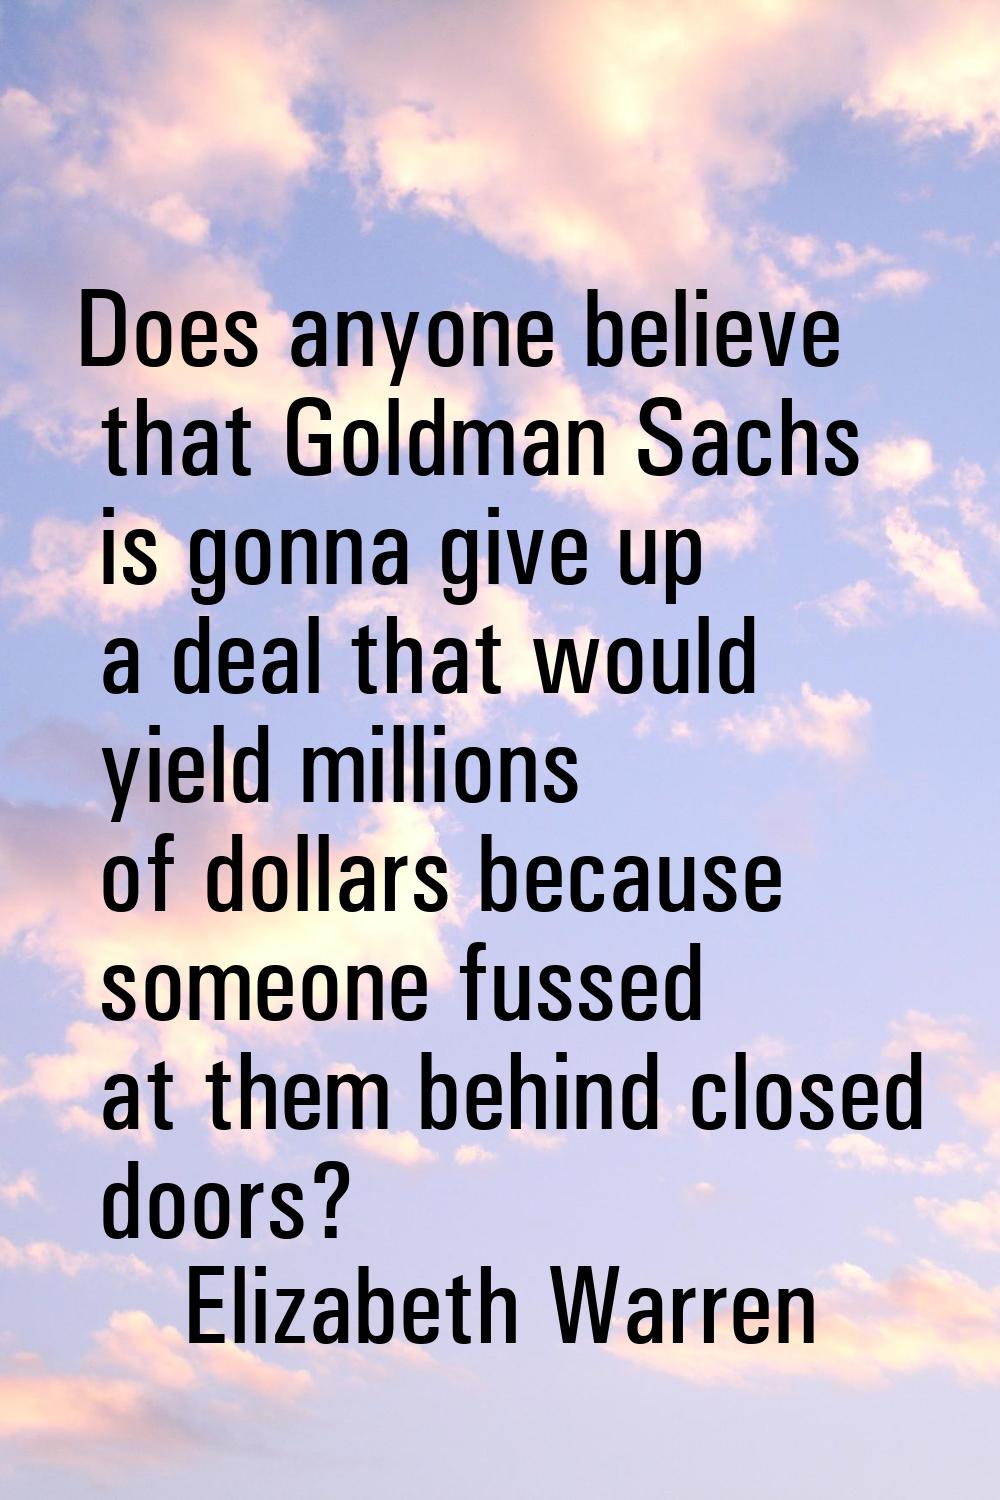 Does anyone believe that Goldman Sachs is gonna give up a deal that would yield millions of dollars